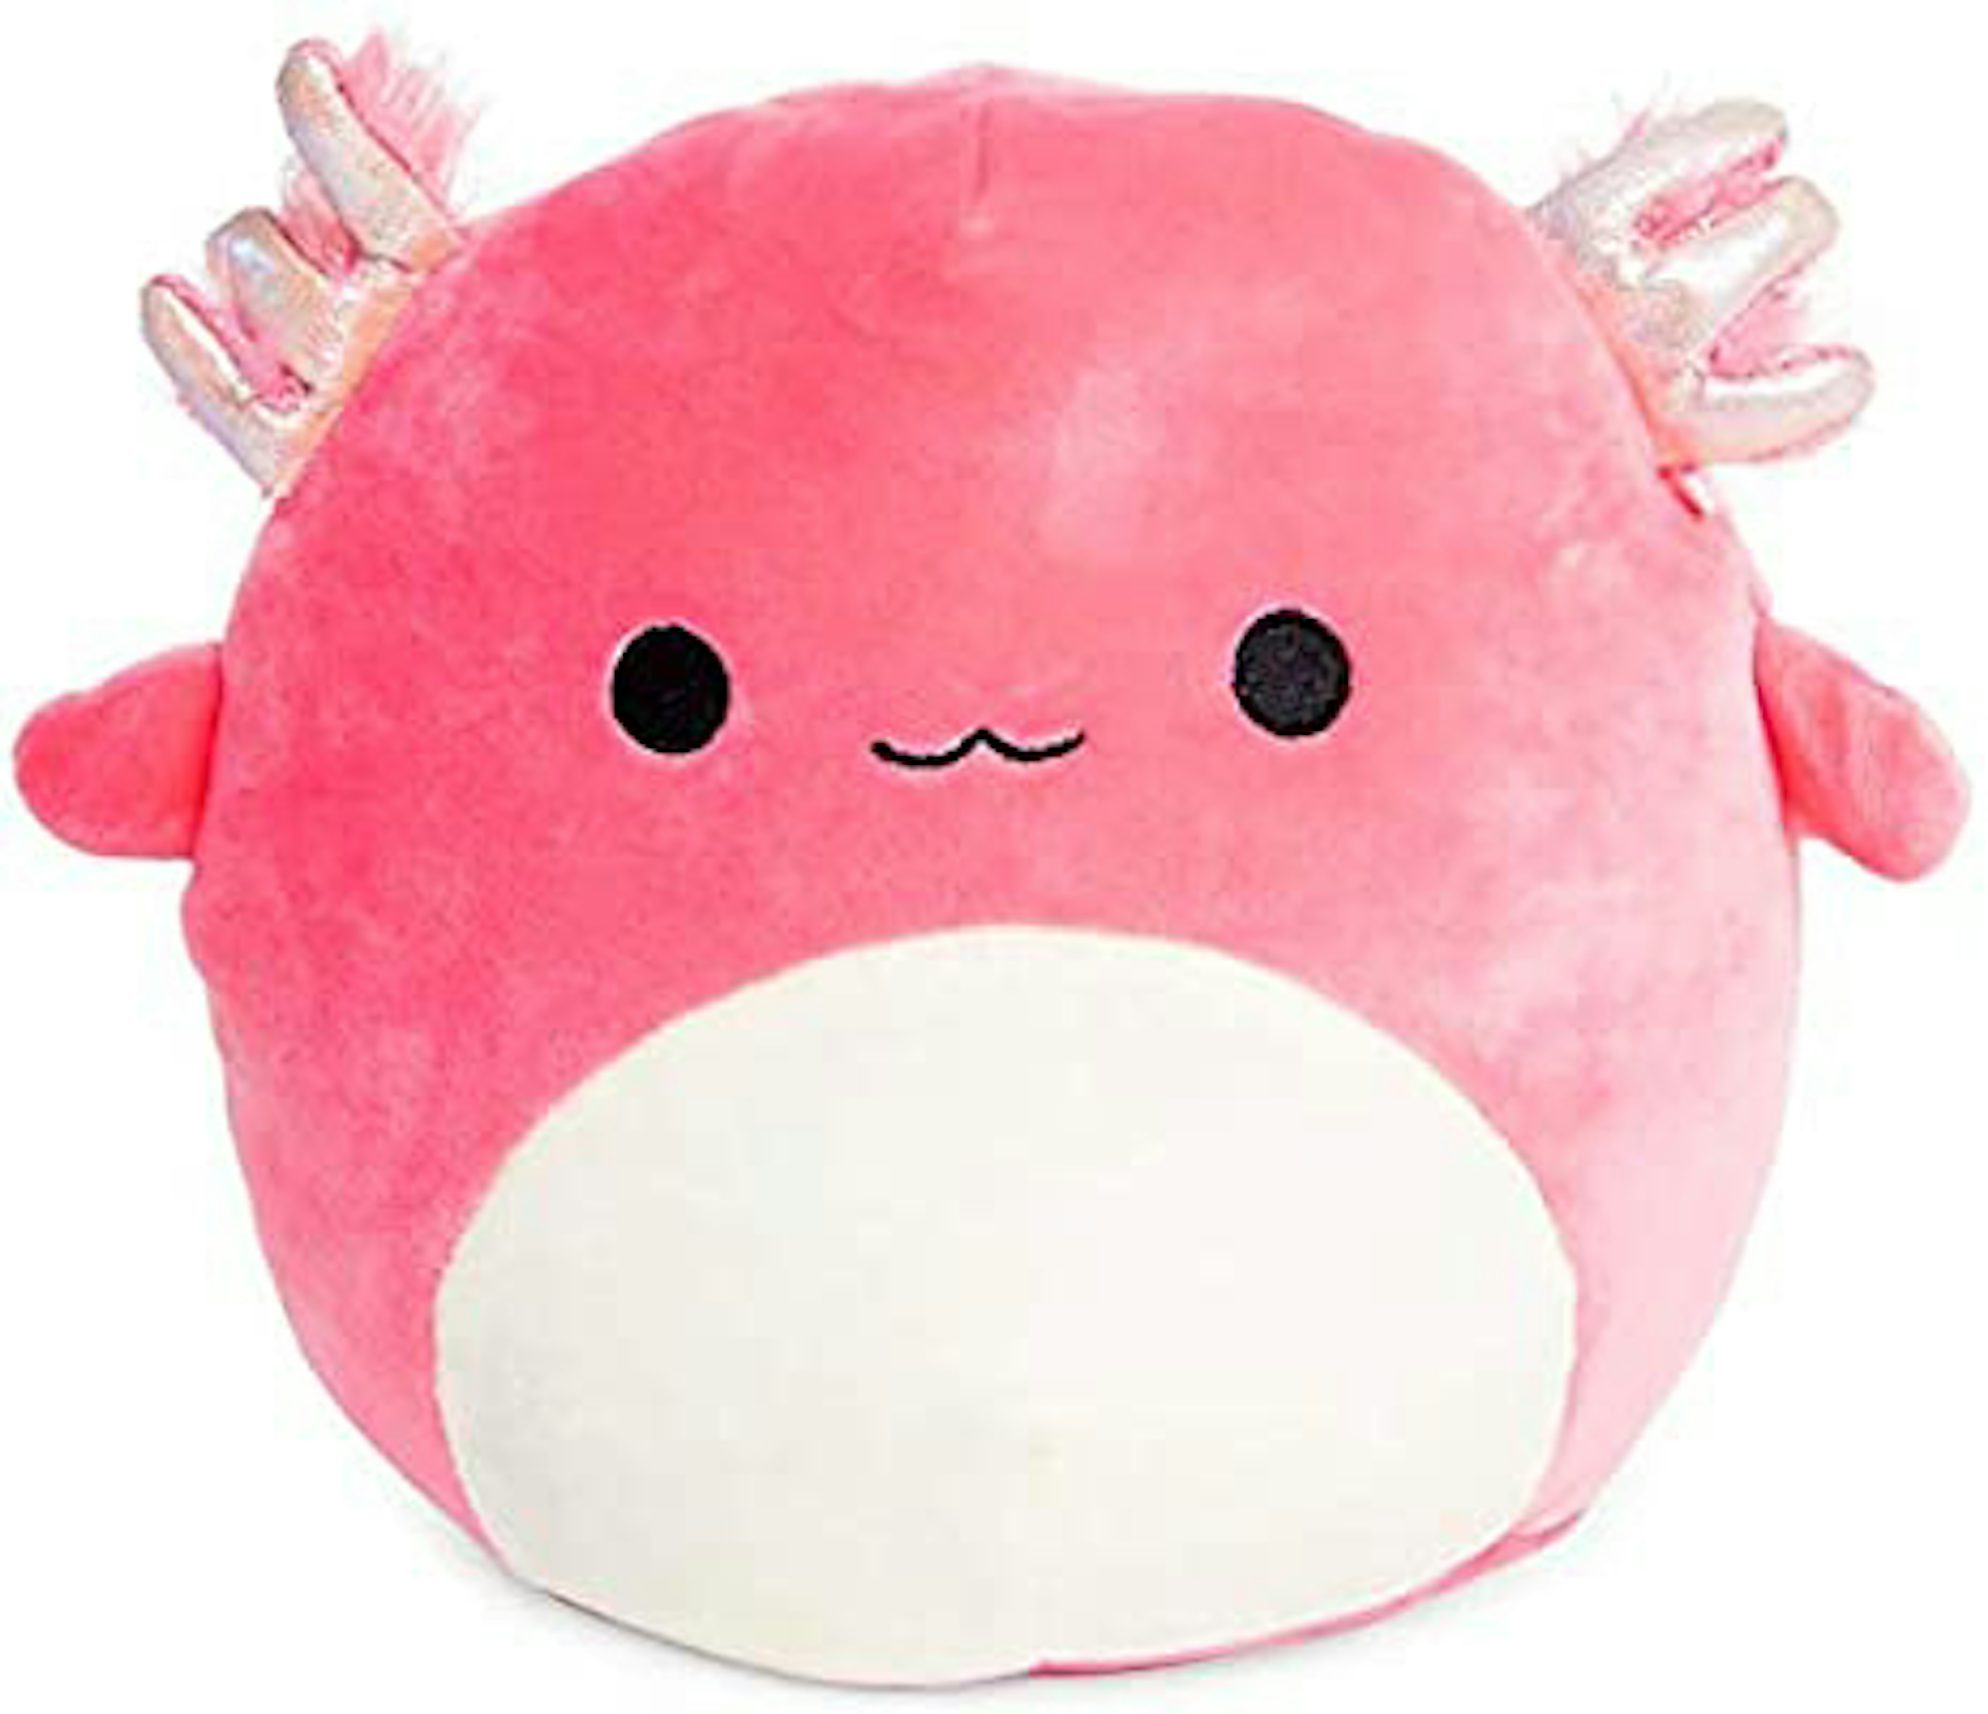 Squishmallows Official Kellytoys 3.5 Inch Archie the Pink Axolotl